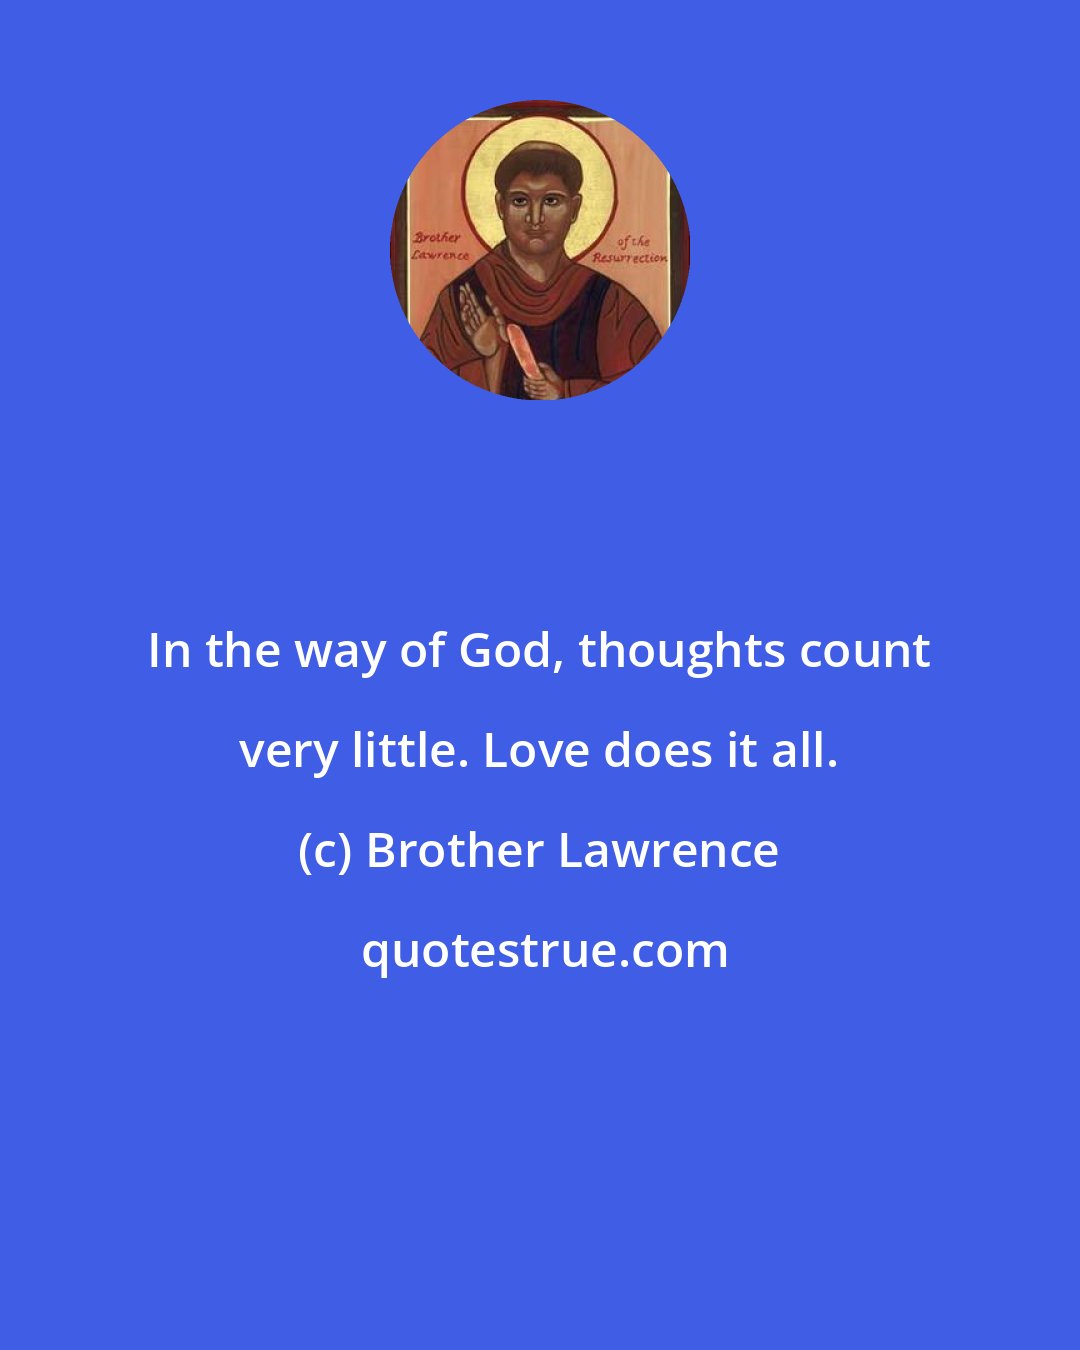 Brother Lawrence: In the way of God, thoughts count very little. Love does it all.